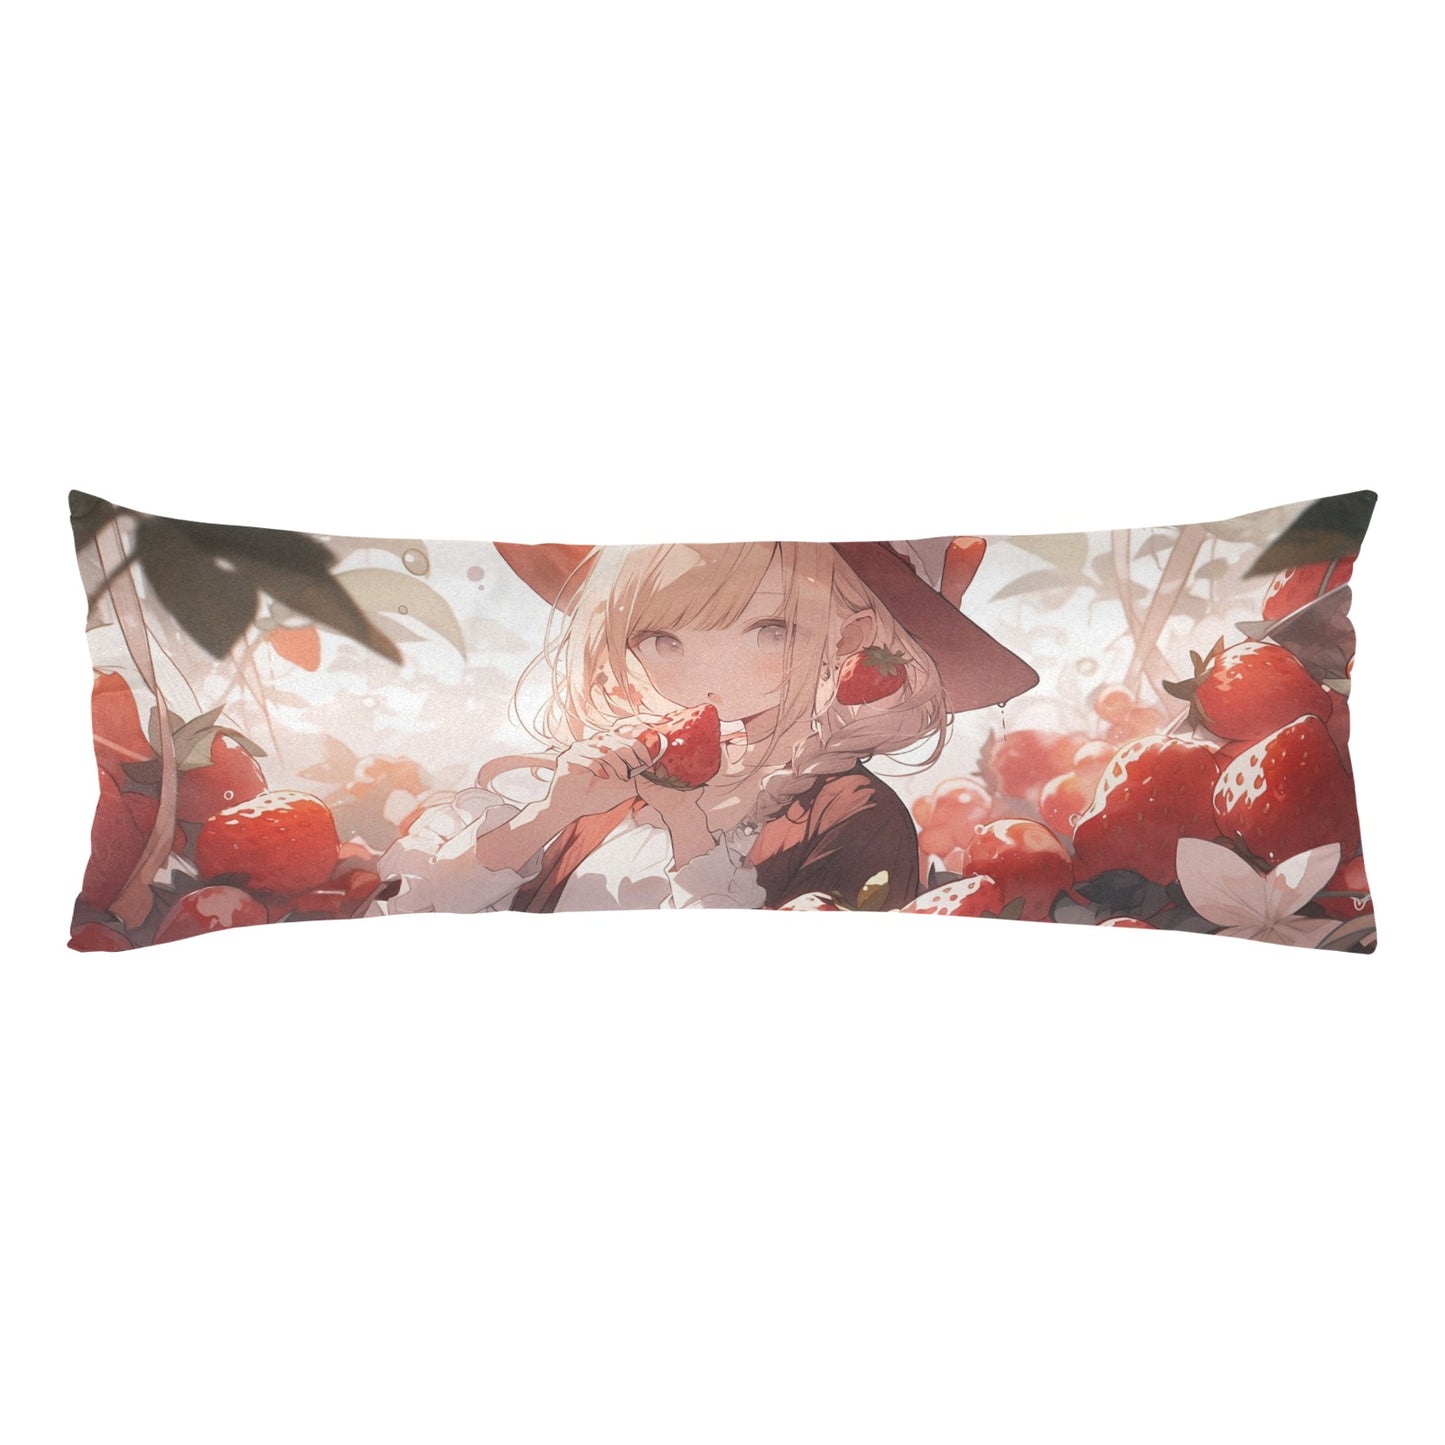 Anime Girl Body Pillow Case, Cute Strawberry Kawaii Kittens Long Large Bed Accent Print Throw Decor Decorative Cover 20x54 Satin Zipper Starcove Fashion